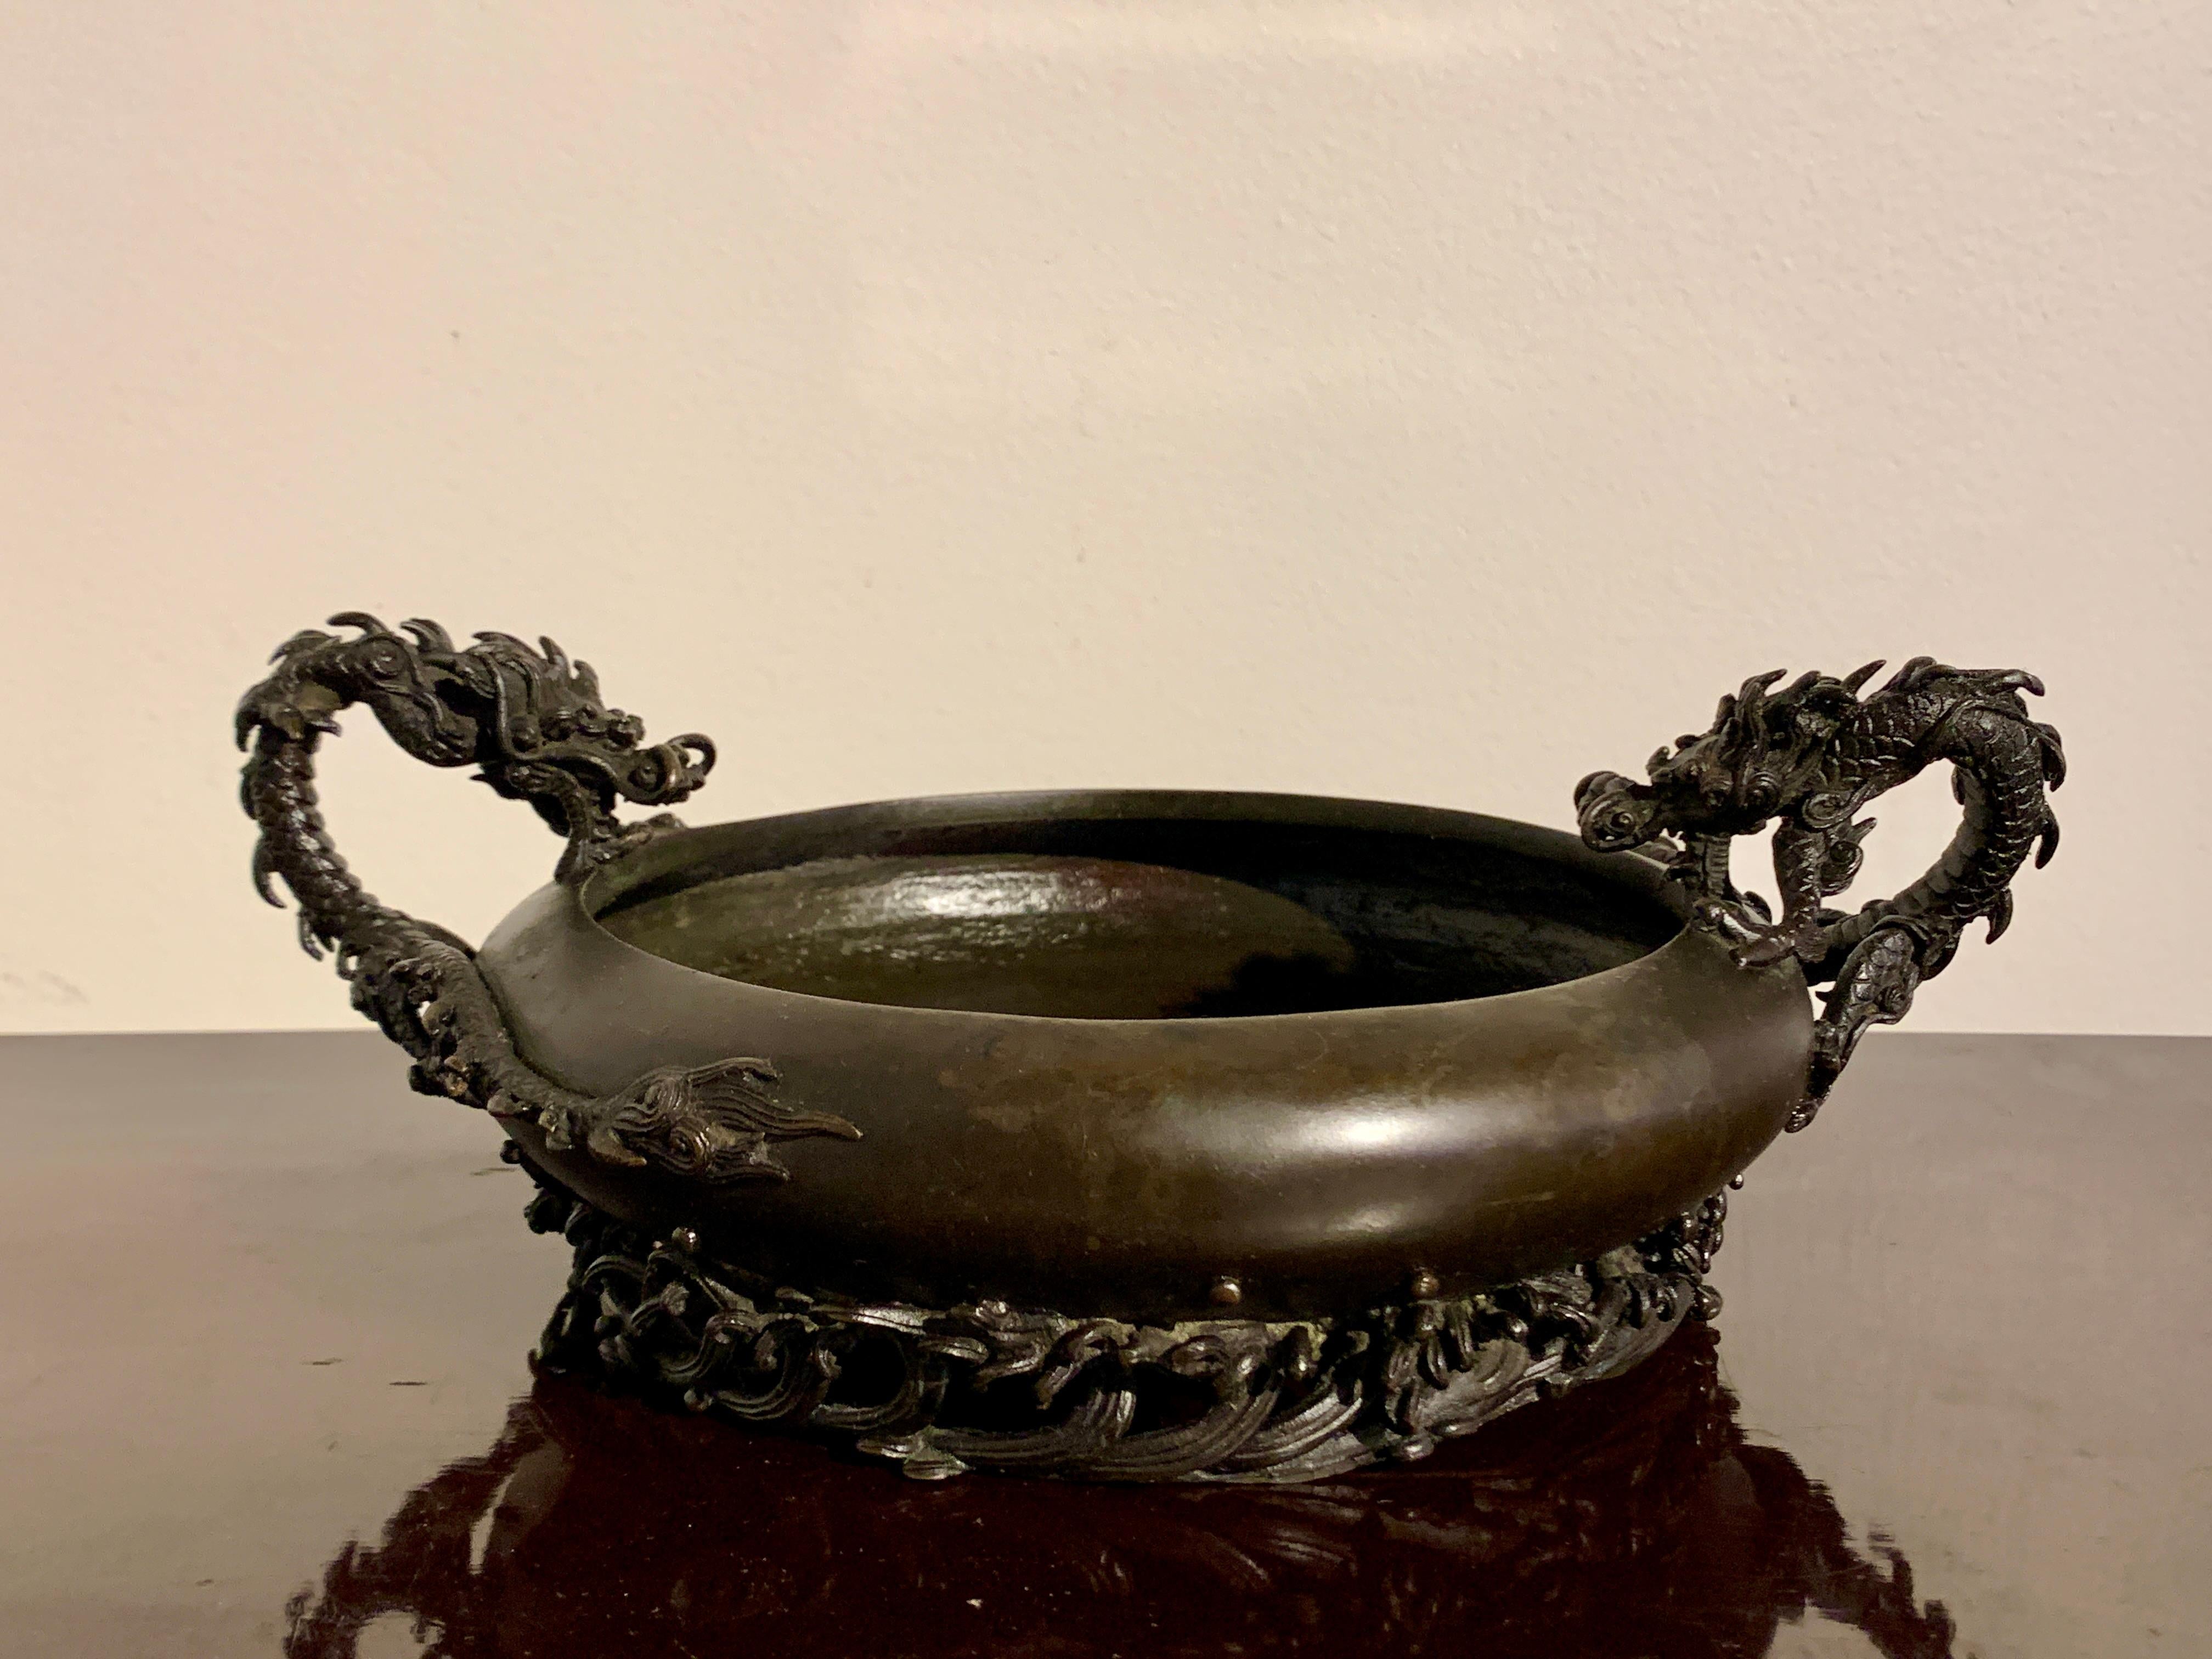 A quiet, yet powerful Japanese bronze suiban, low vessel for ikebana flower arranging, Meiji period, late 19th century, Japan.

The low ikebana vessel, known as a suiban, of cast bronze and formed as a shallow basin with a pair of dragon handles,